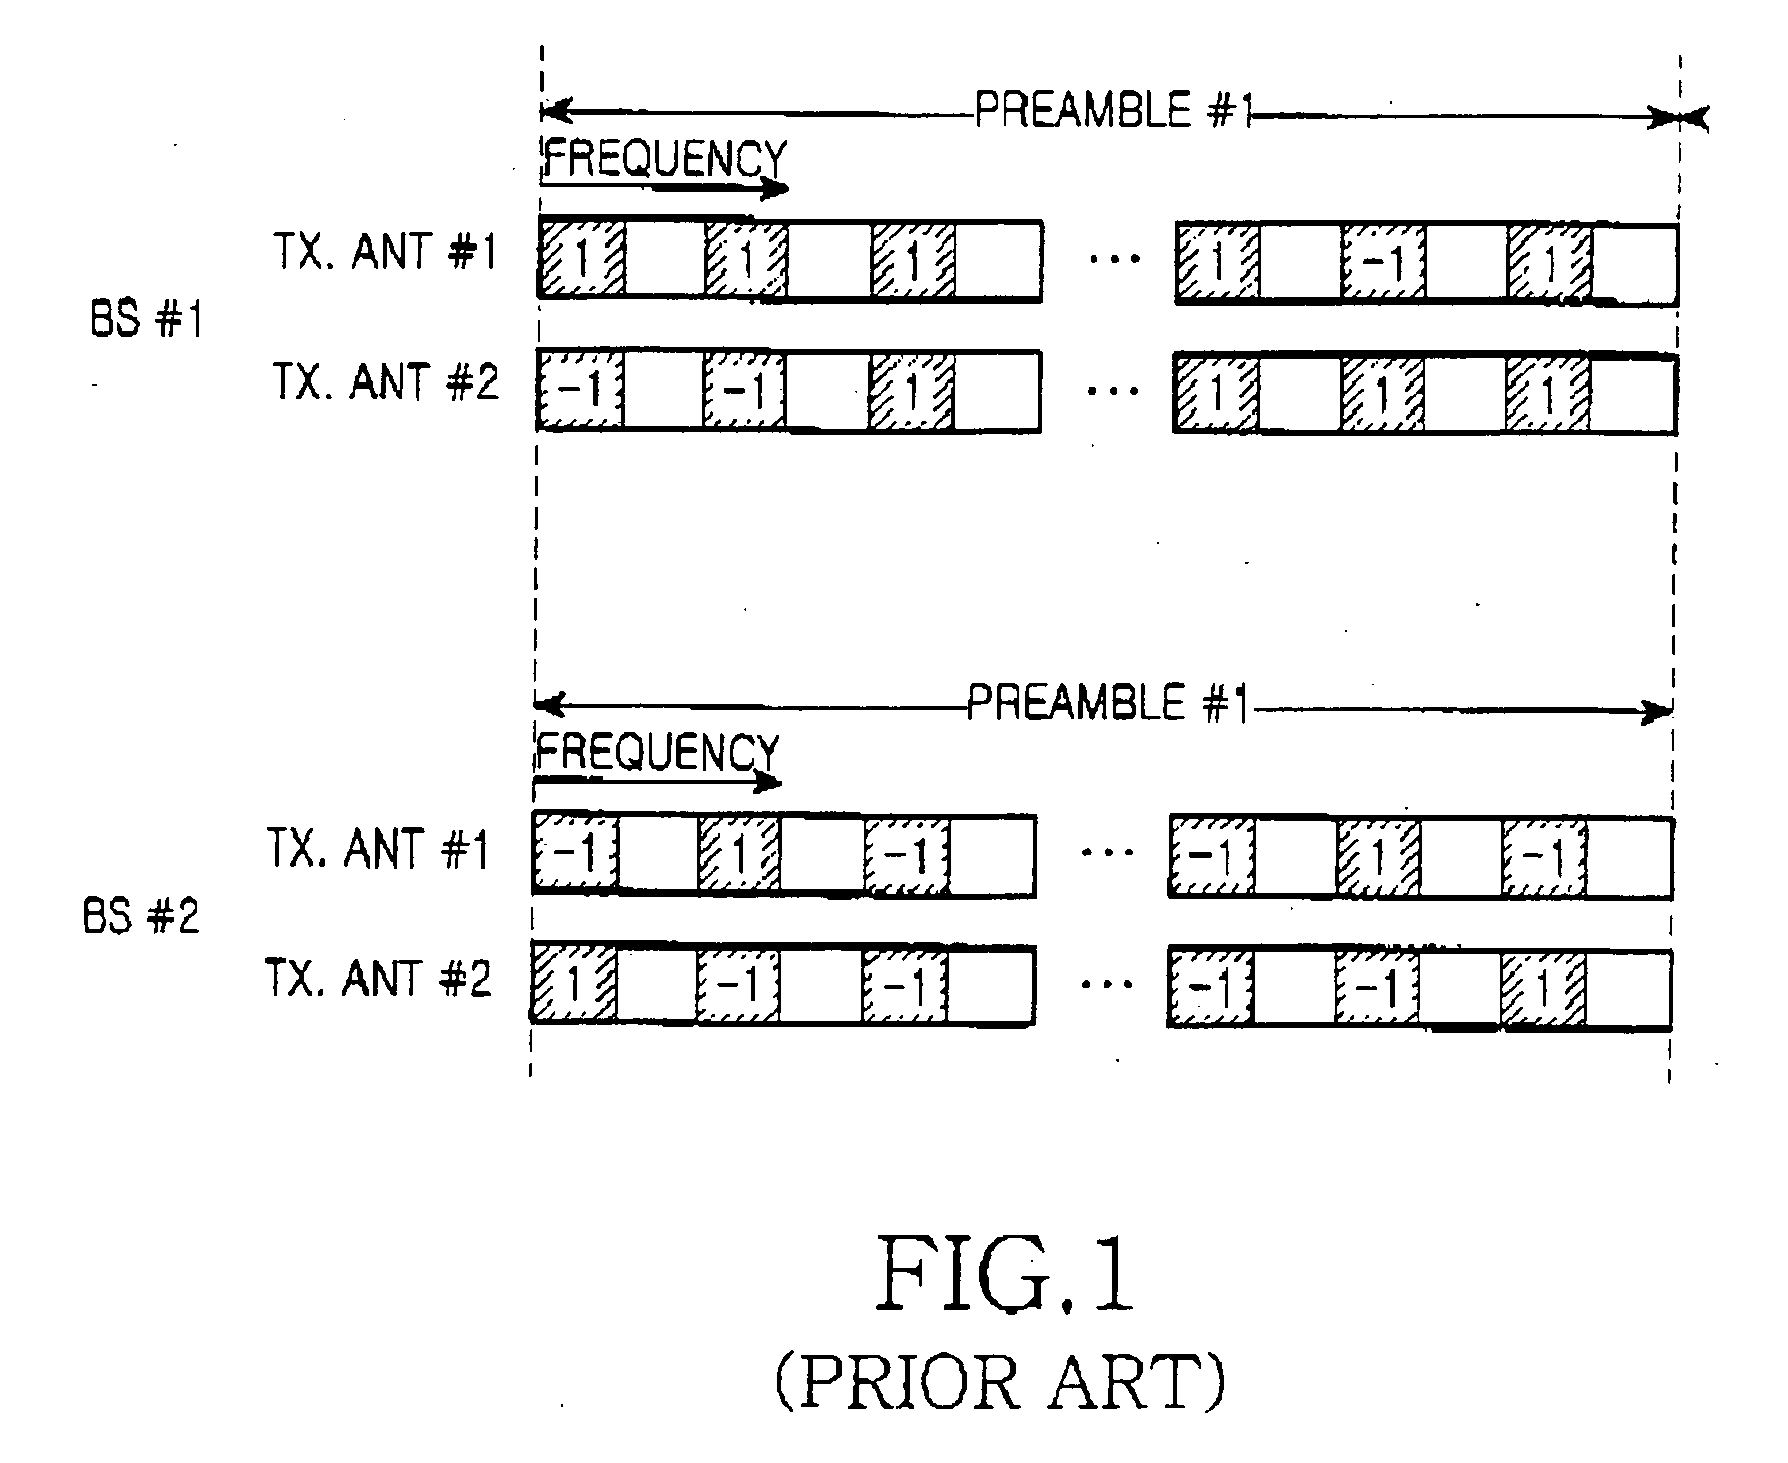 Method for transmitting and receiving preamble sequences in an orthogonal frequency division multiplexing communication system using a multiple input multiple output scheme